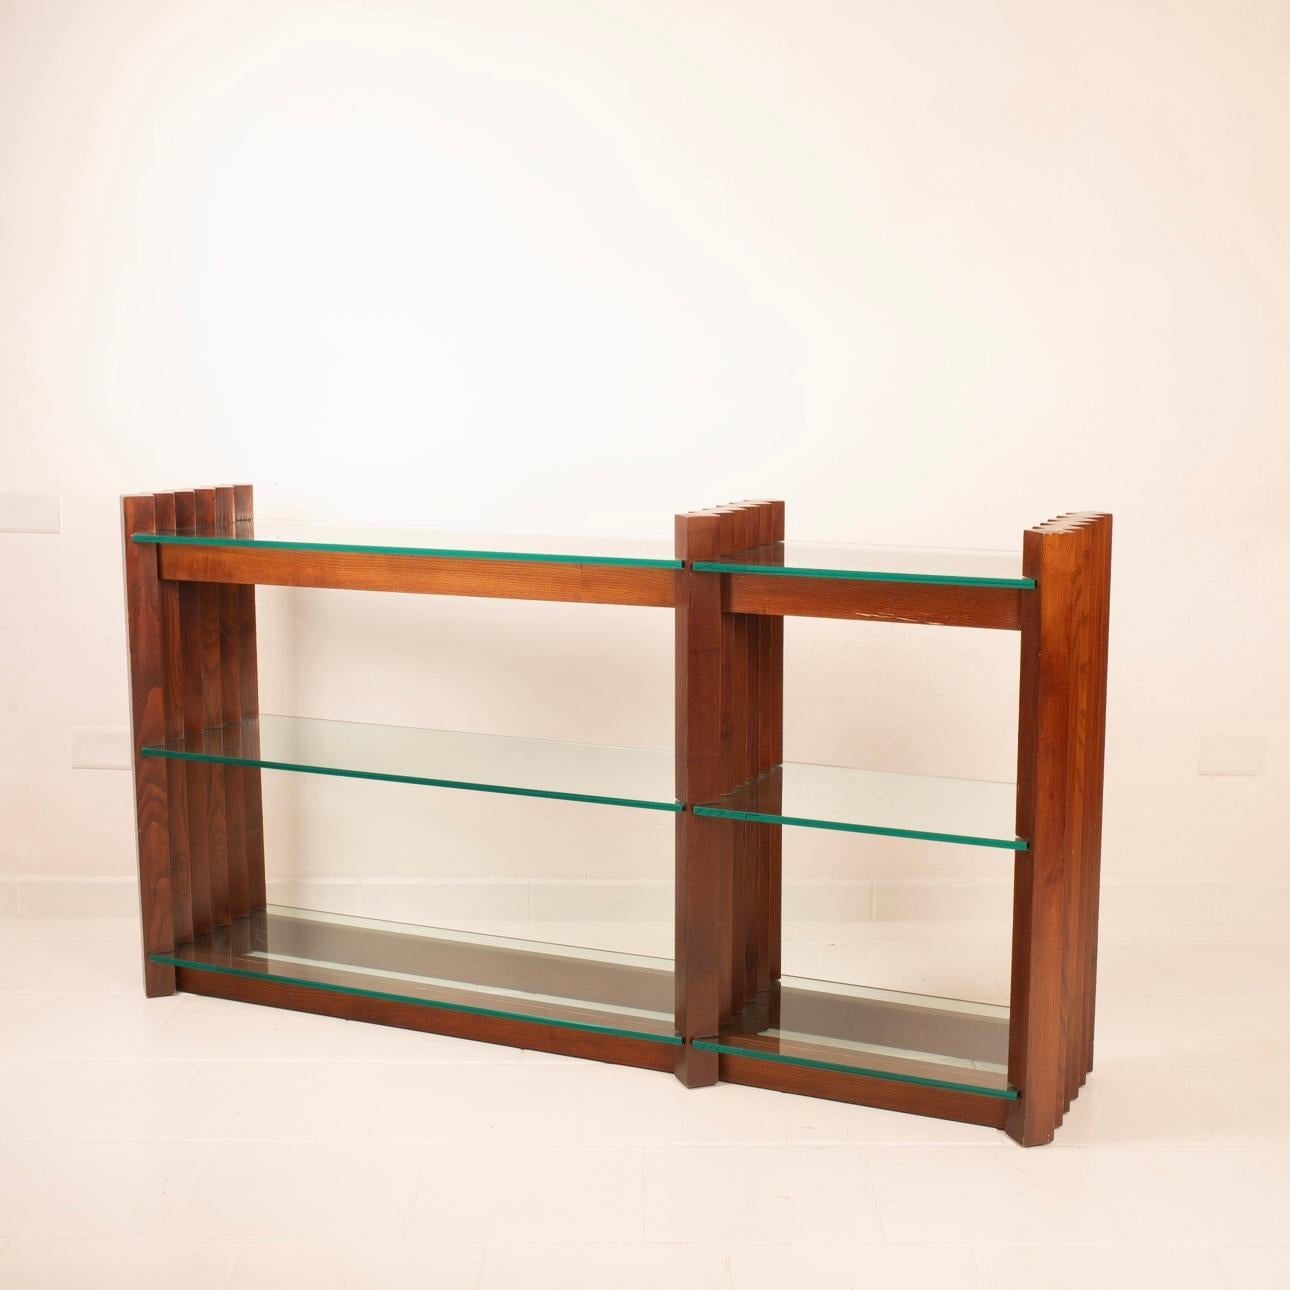 Solid Wood and Crystal Console Table from the 1960s att. Carlo Scarpa 1960's For Sale 6